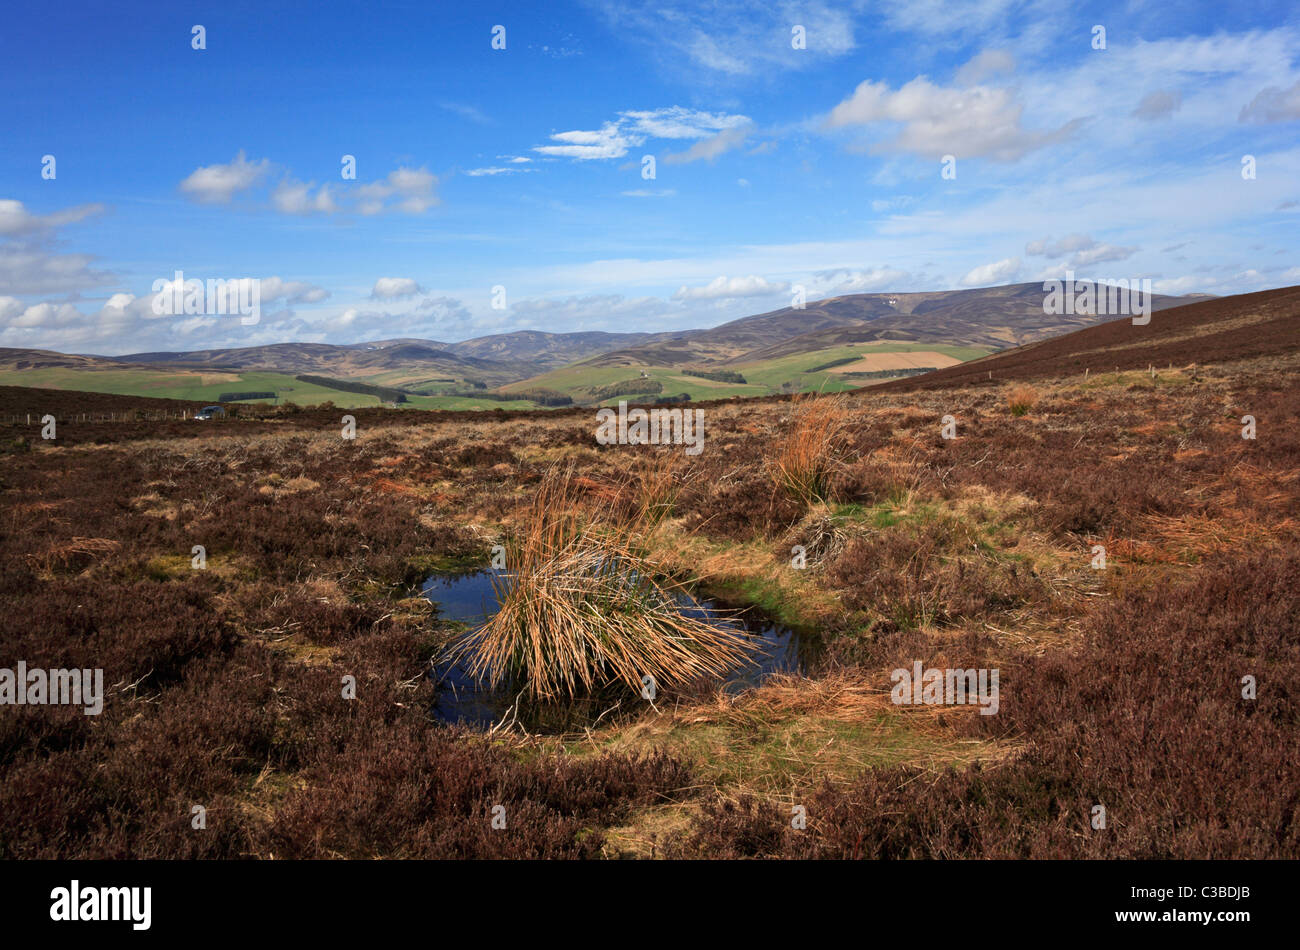 A view of the Angus hills and glens from the lower slopes of the Brown Caterthun hill fort near Edzell, Angus, Scotland, UK. Stock Photo